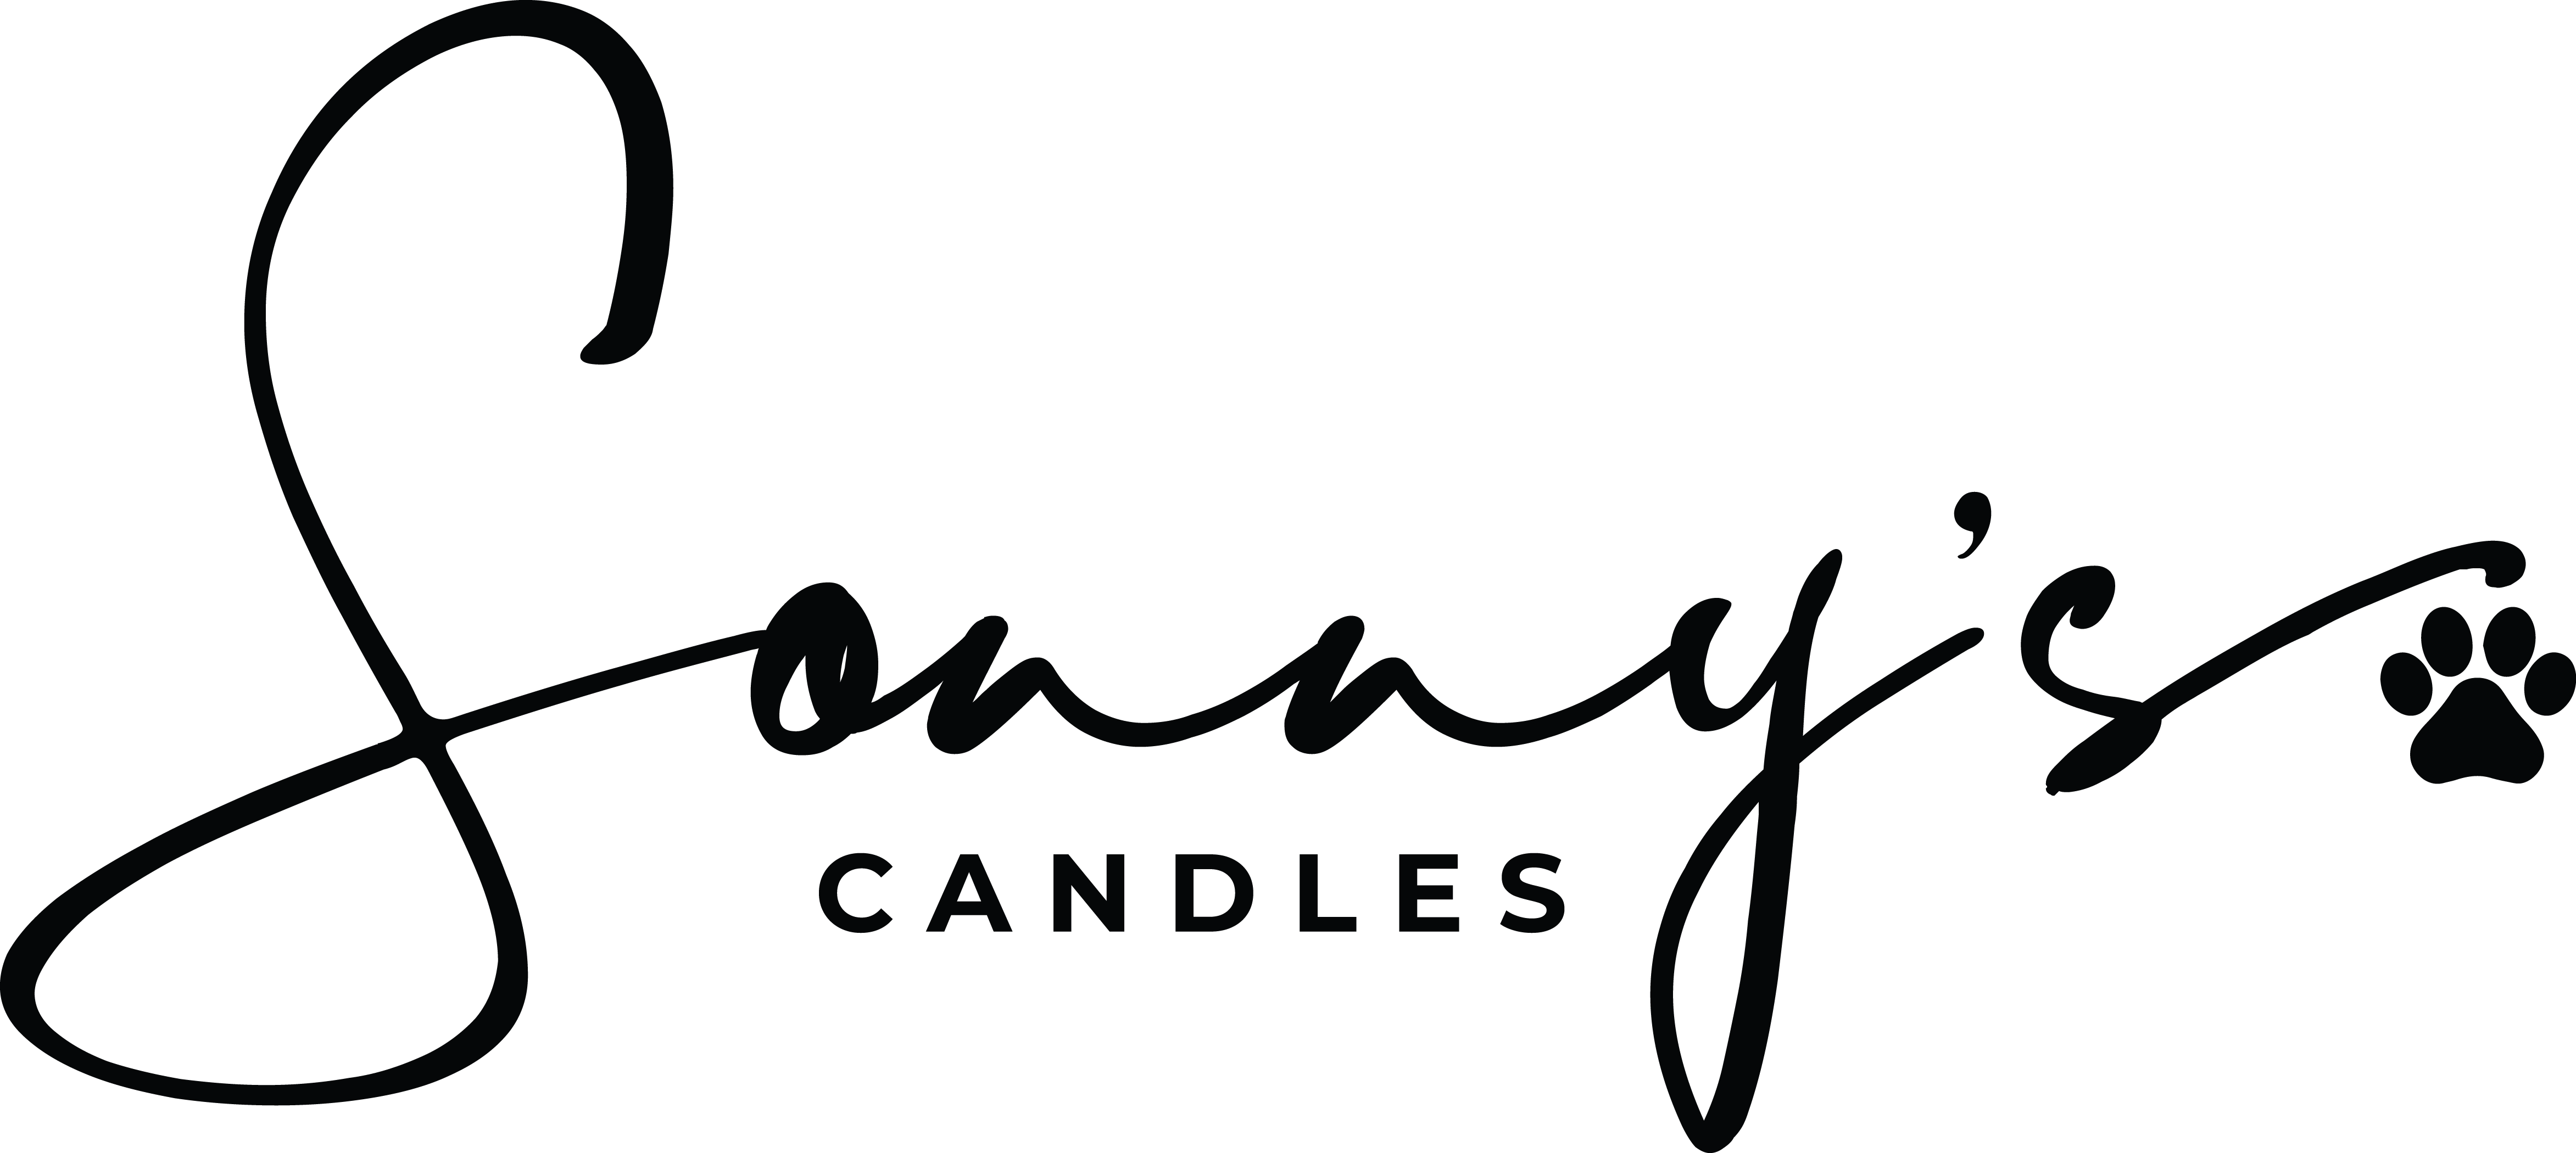 Sonny's Candles